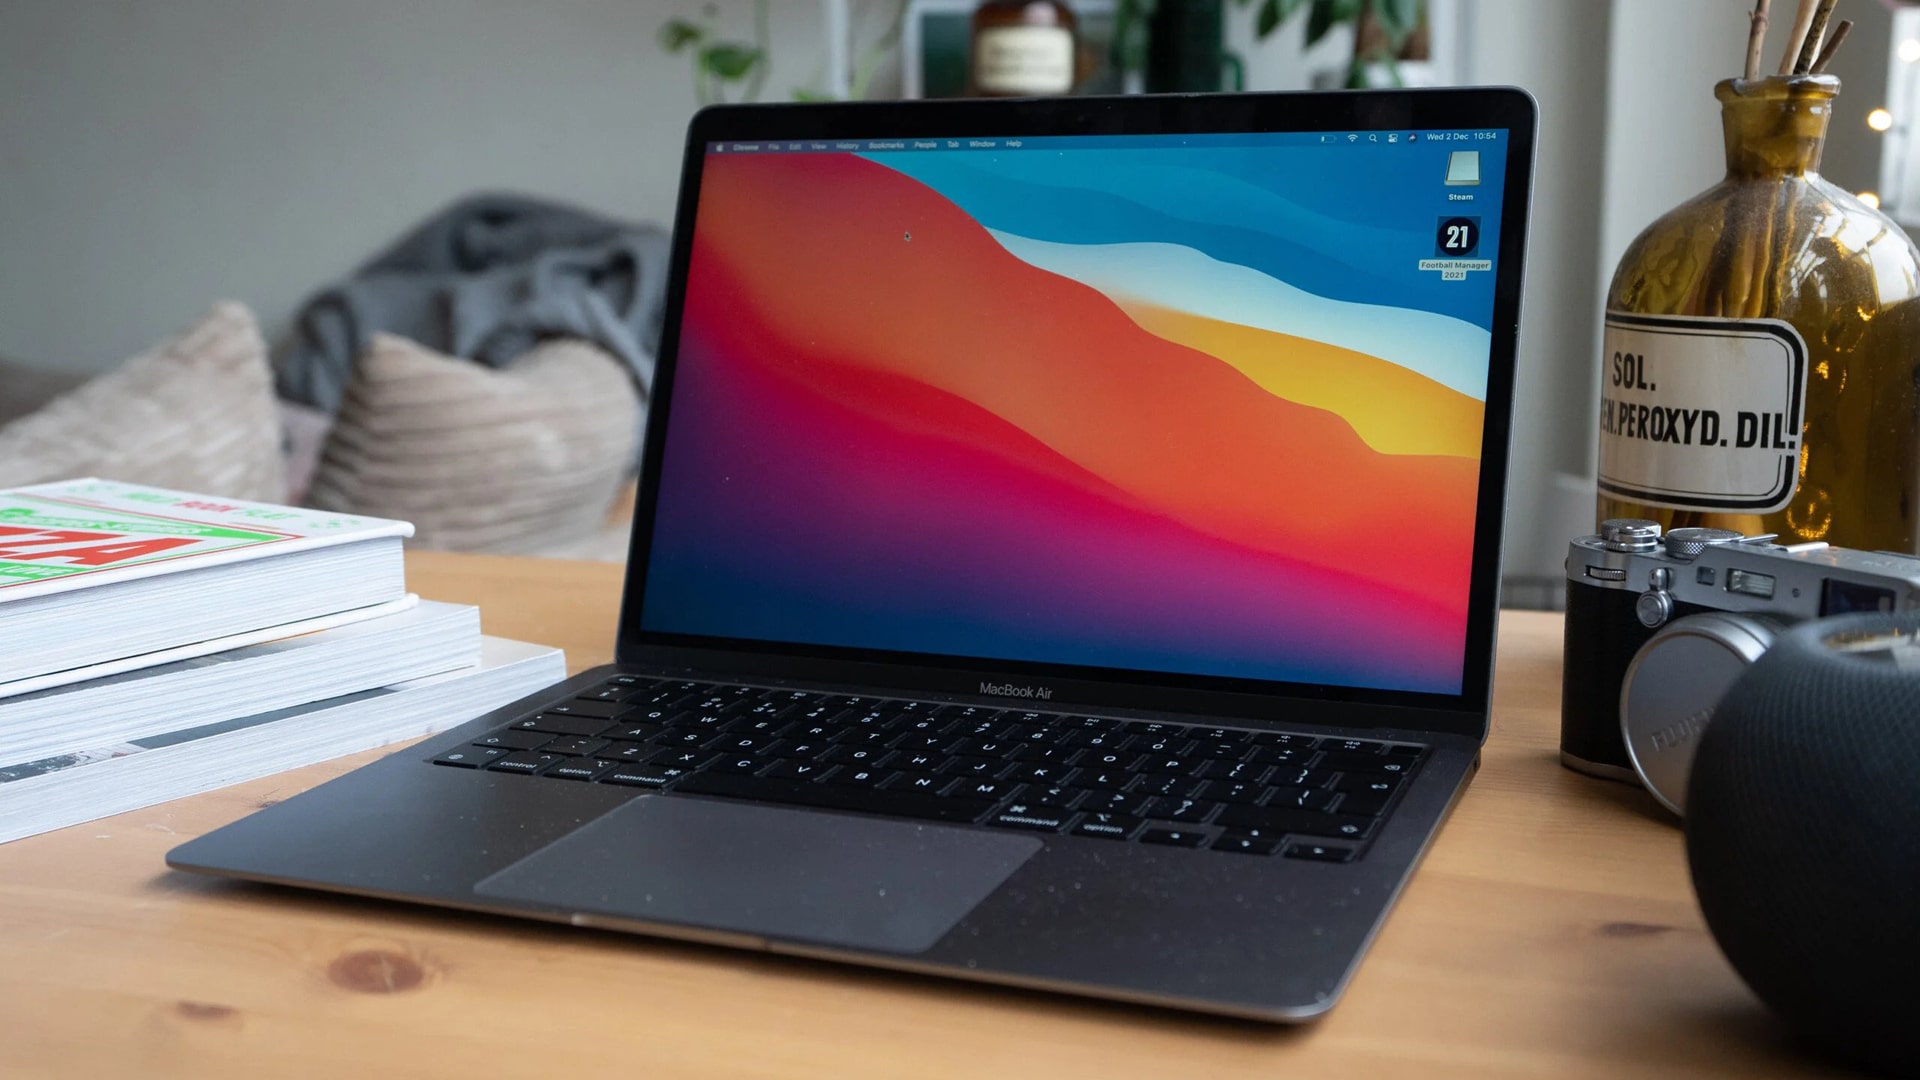 Image of an M1 MacBook Air, showcasing its sleek design and highlighting its suitability for high-performance gaming.